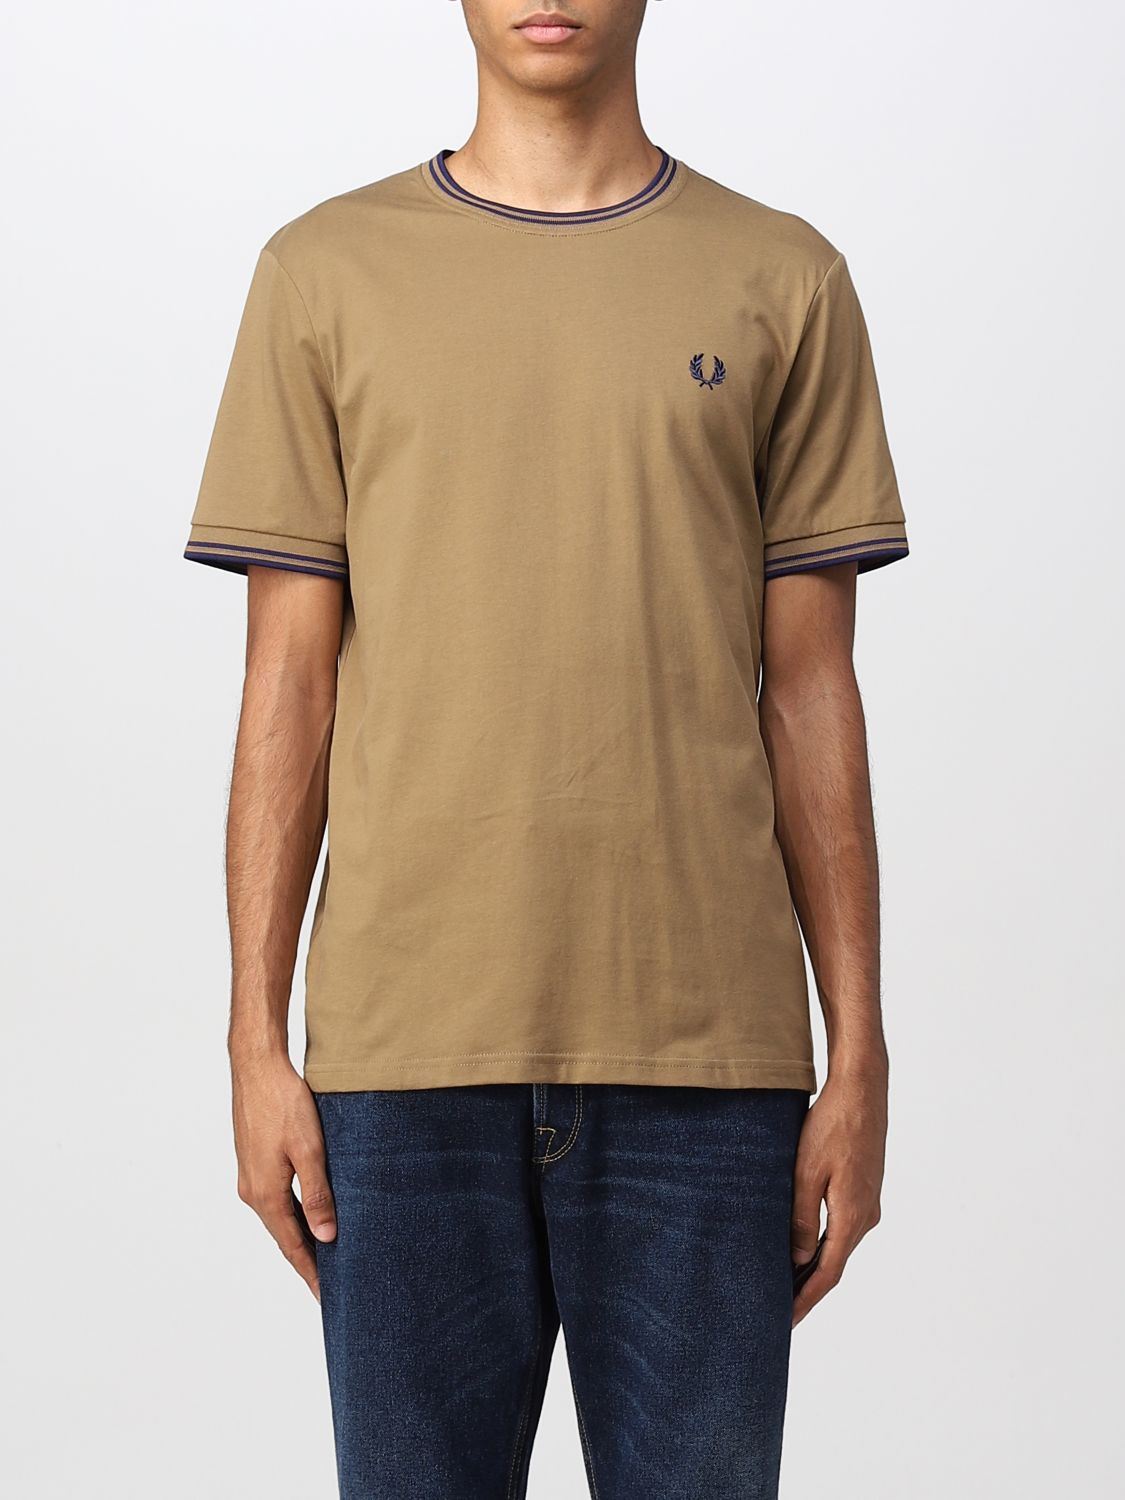 T-shirt Fred Perry: Fred Perry t-shirt for man brown 1